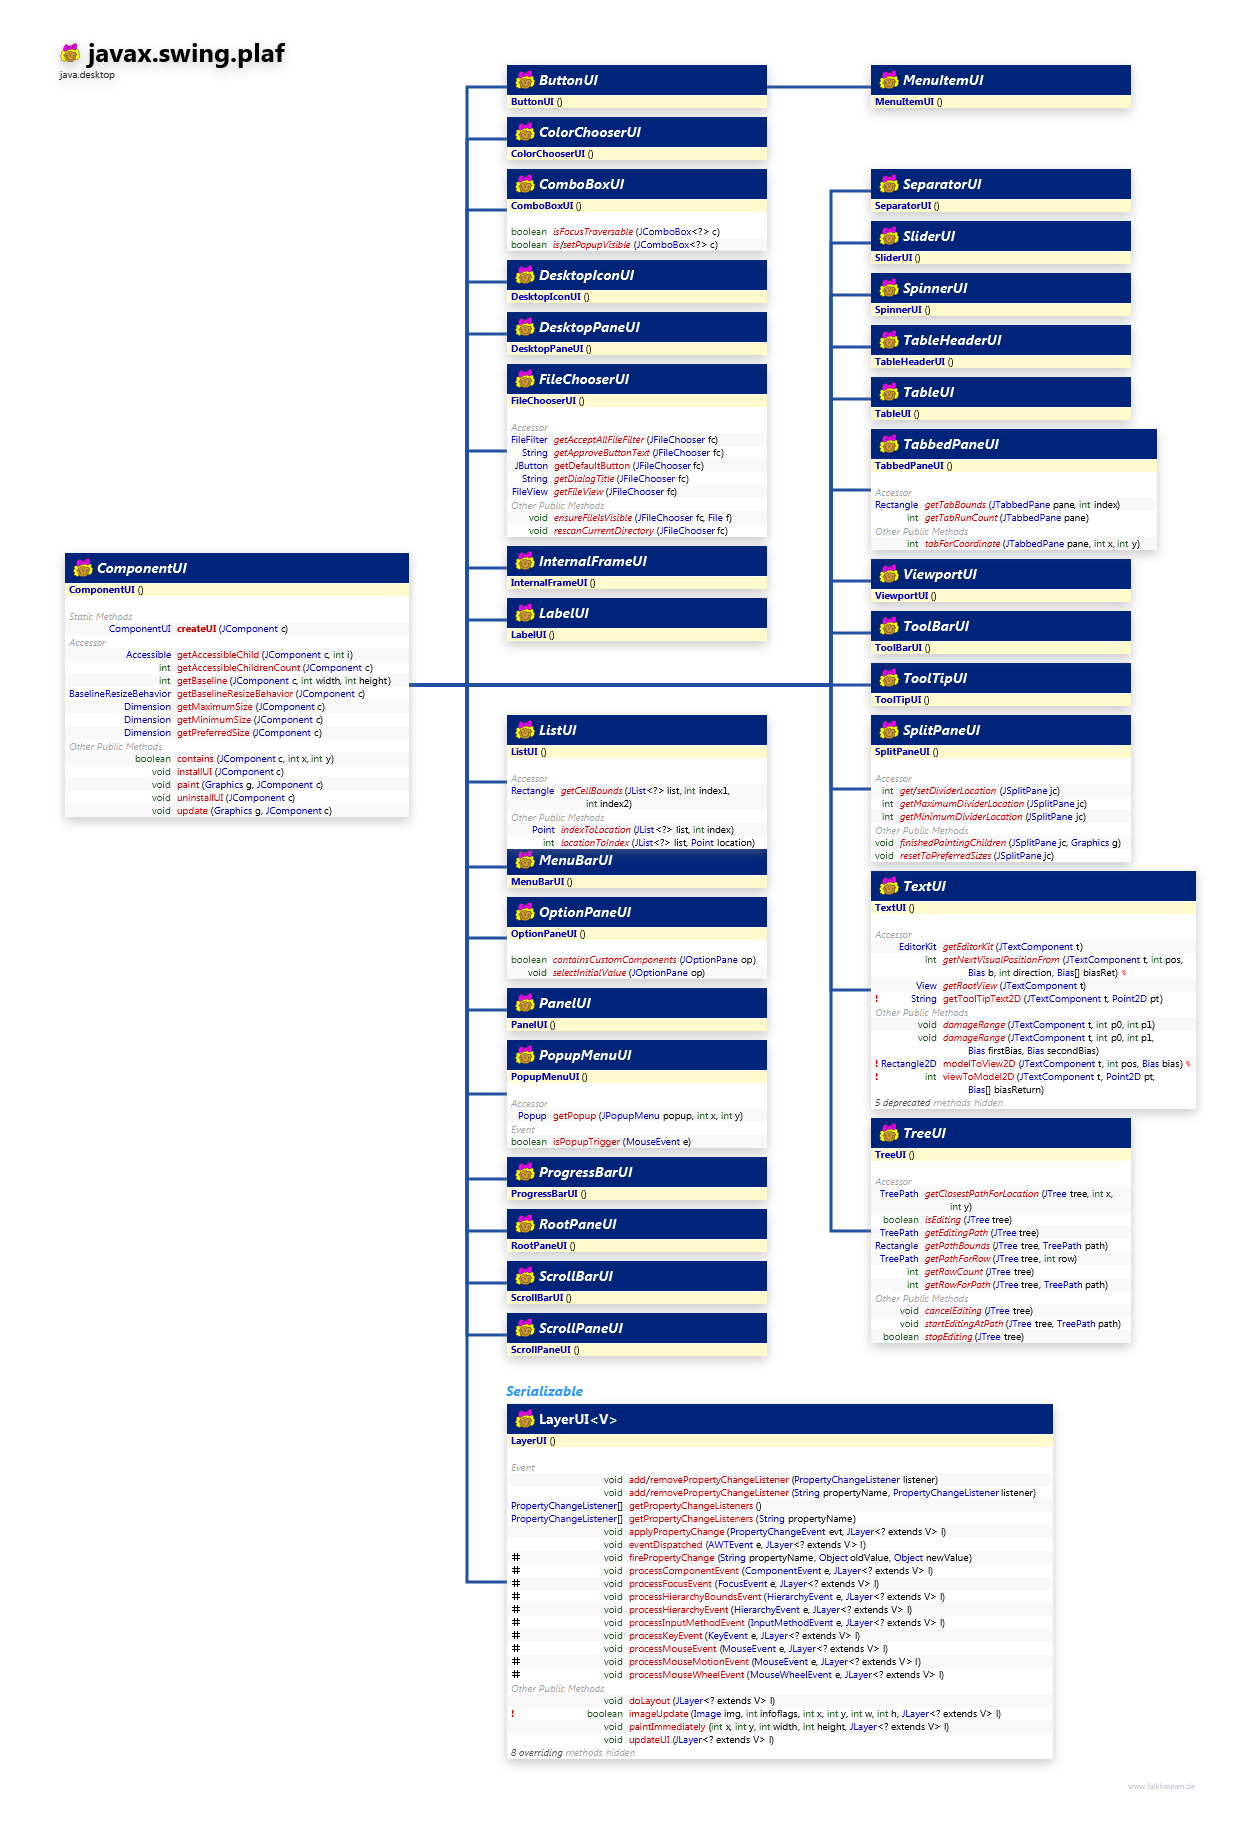 javax.swing.plaf ComponentUIs class diagram and api documentation for Java 10